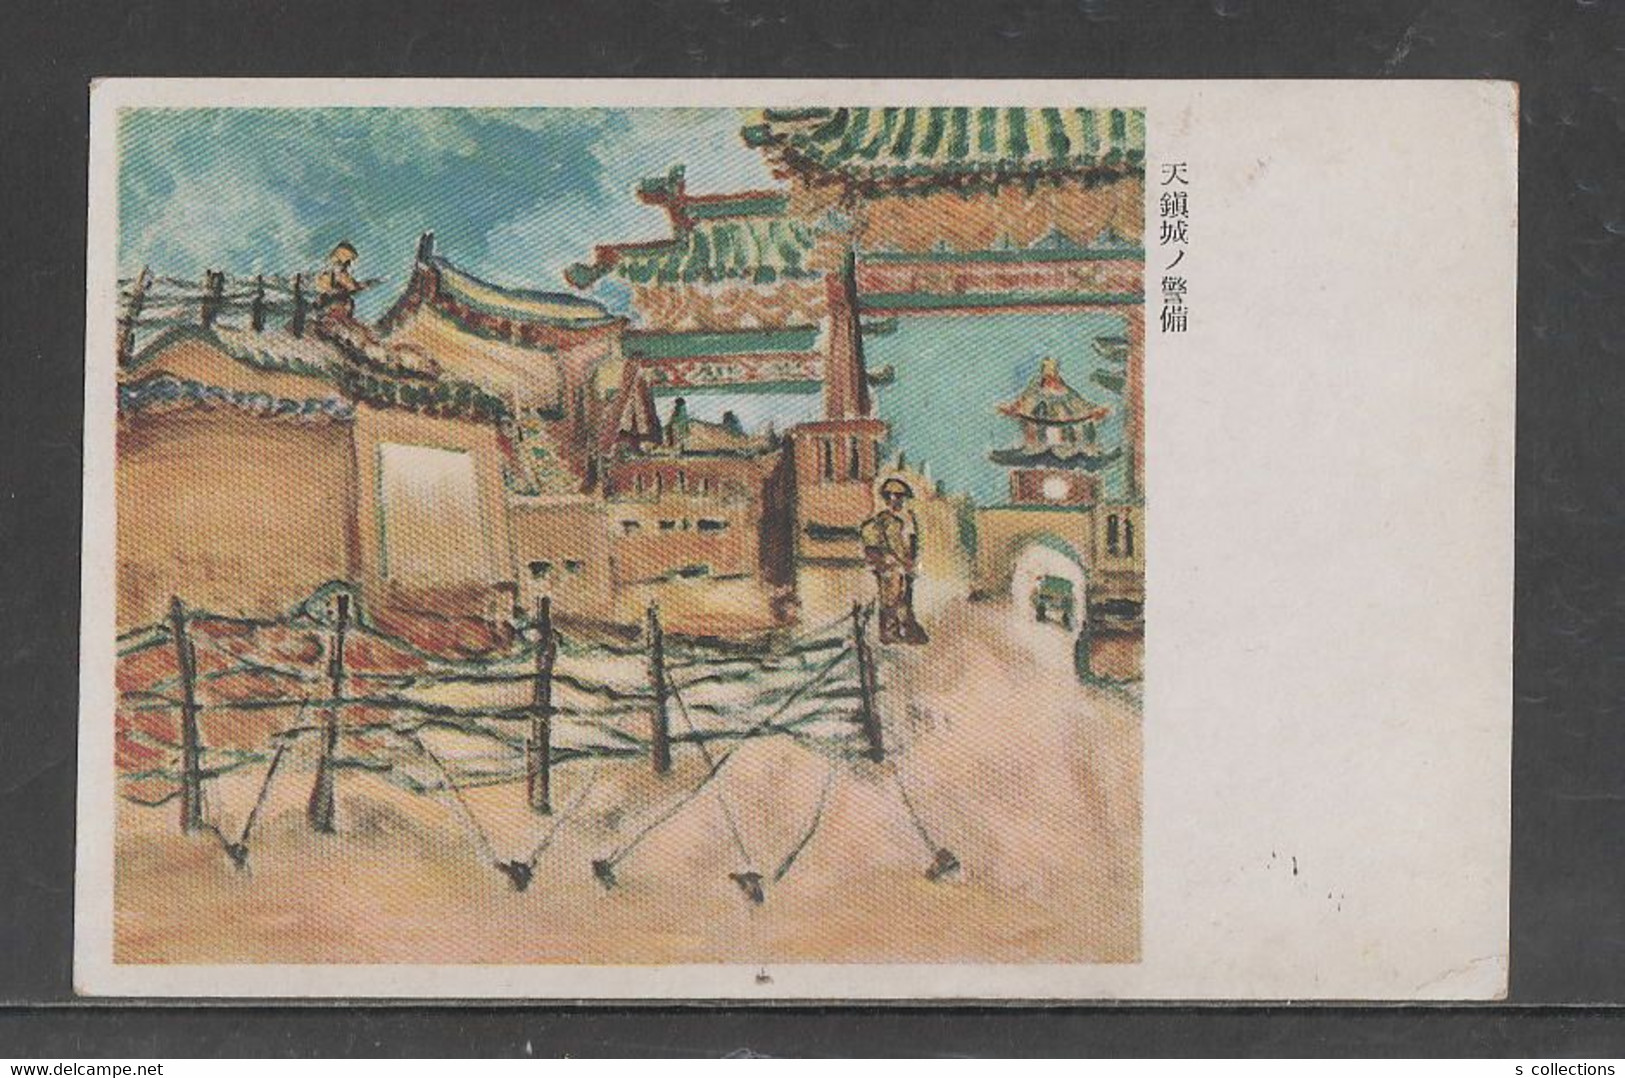 JAPAN WWII Military Tianzhen Castle Picture Postcard NORTH CHINA WW2 MANCHURIA CHINE MANDCHOUKOUO JAPON GIAPPONE - 1941-45 Cina Del Nord